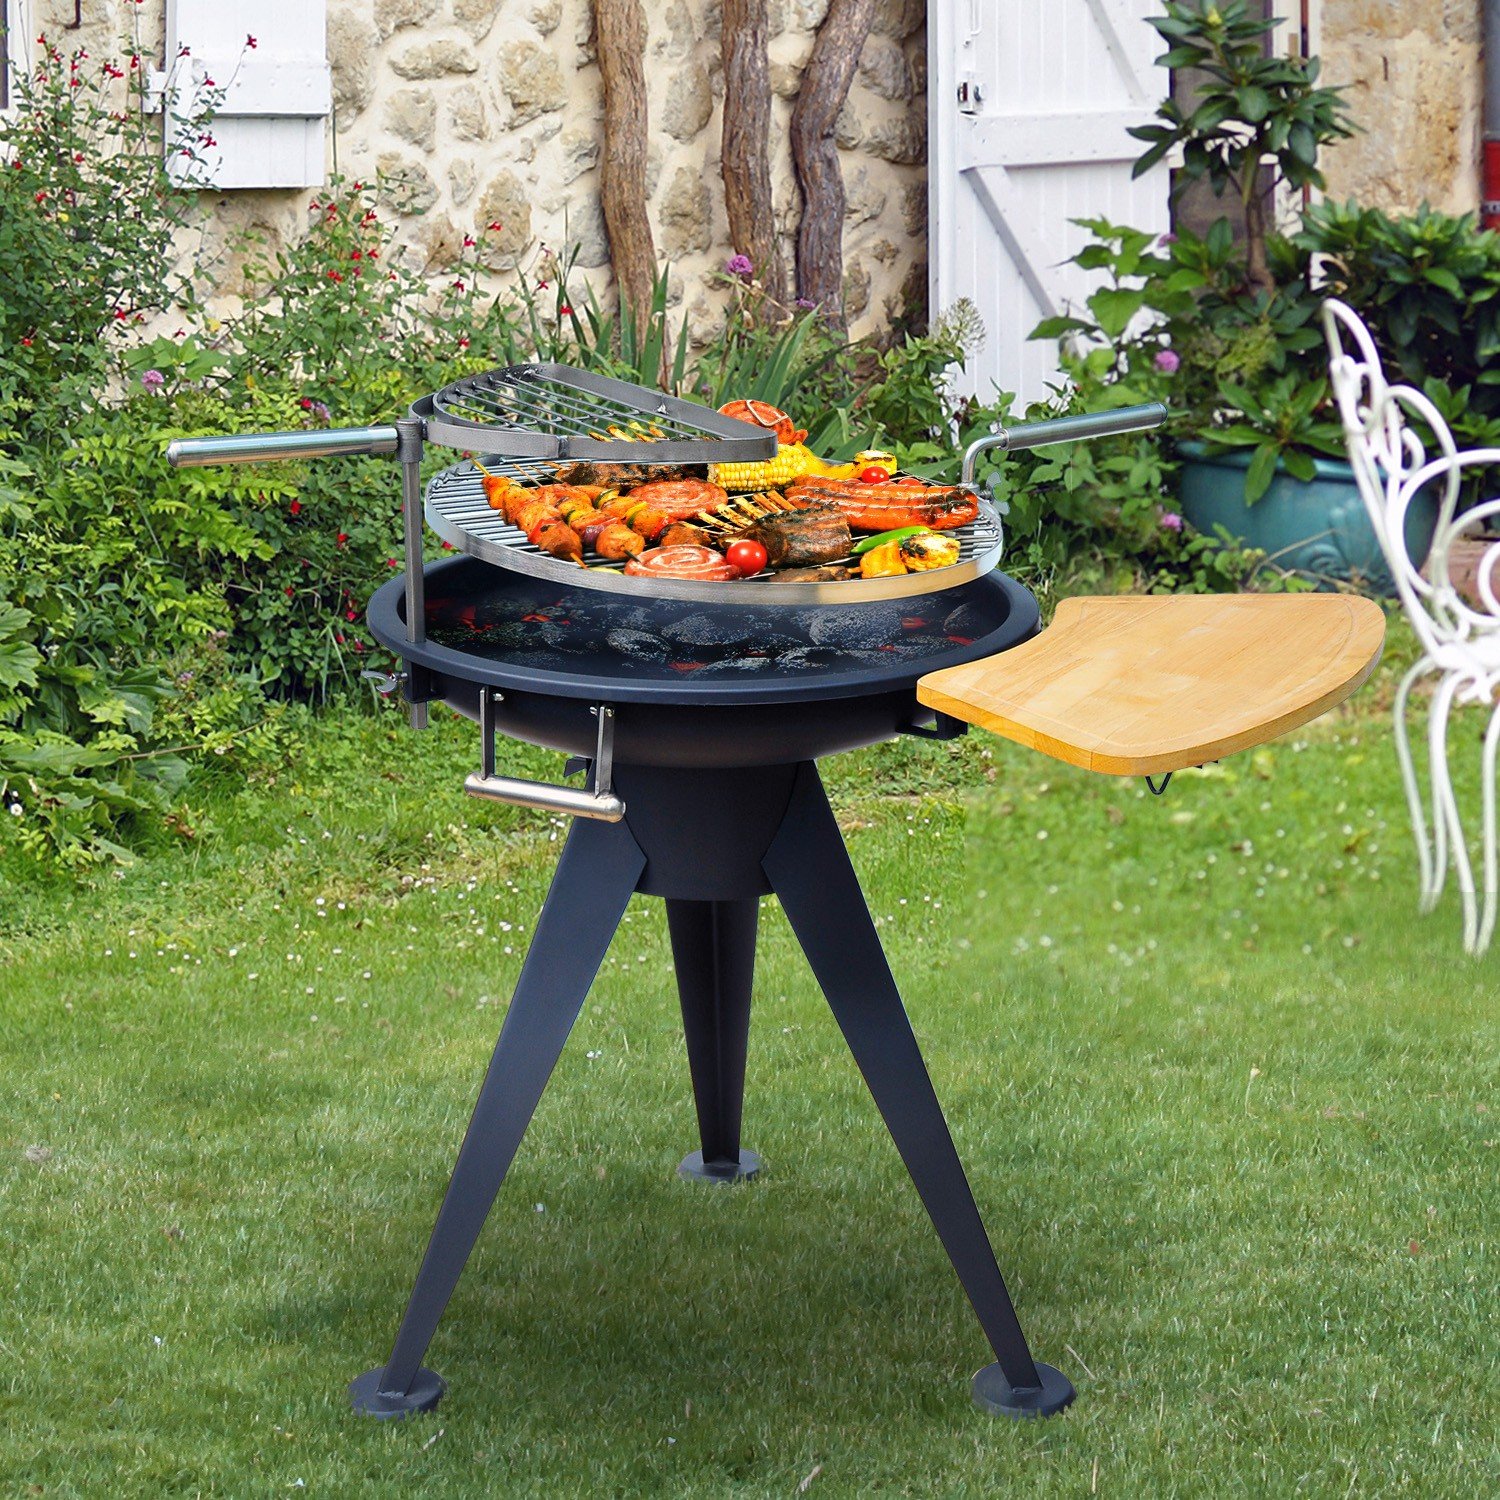 Outsunny Outdoor Garden Patio Adjustable Barbecue Double Grill Charcoal Bbq Party Cooking Fire Pit With Cutting Board Black ?borderless=1&width=1920